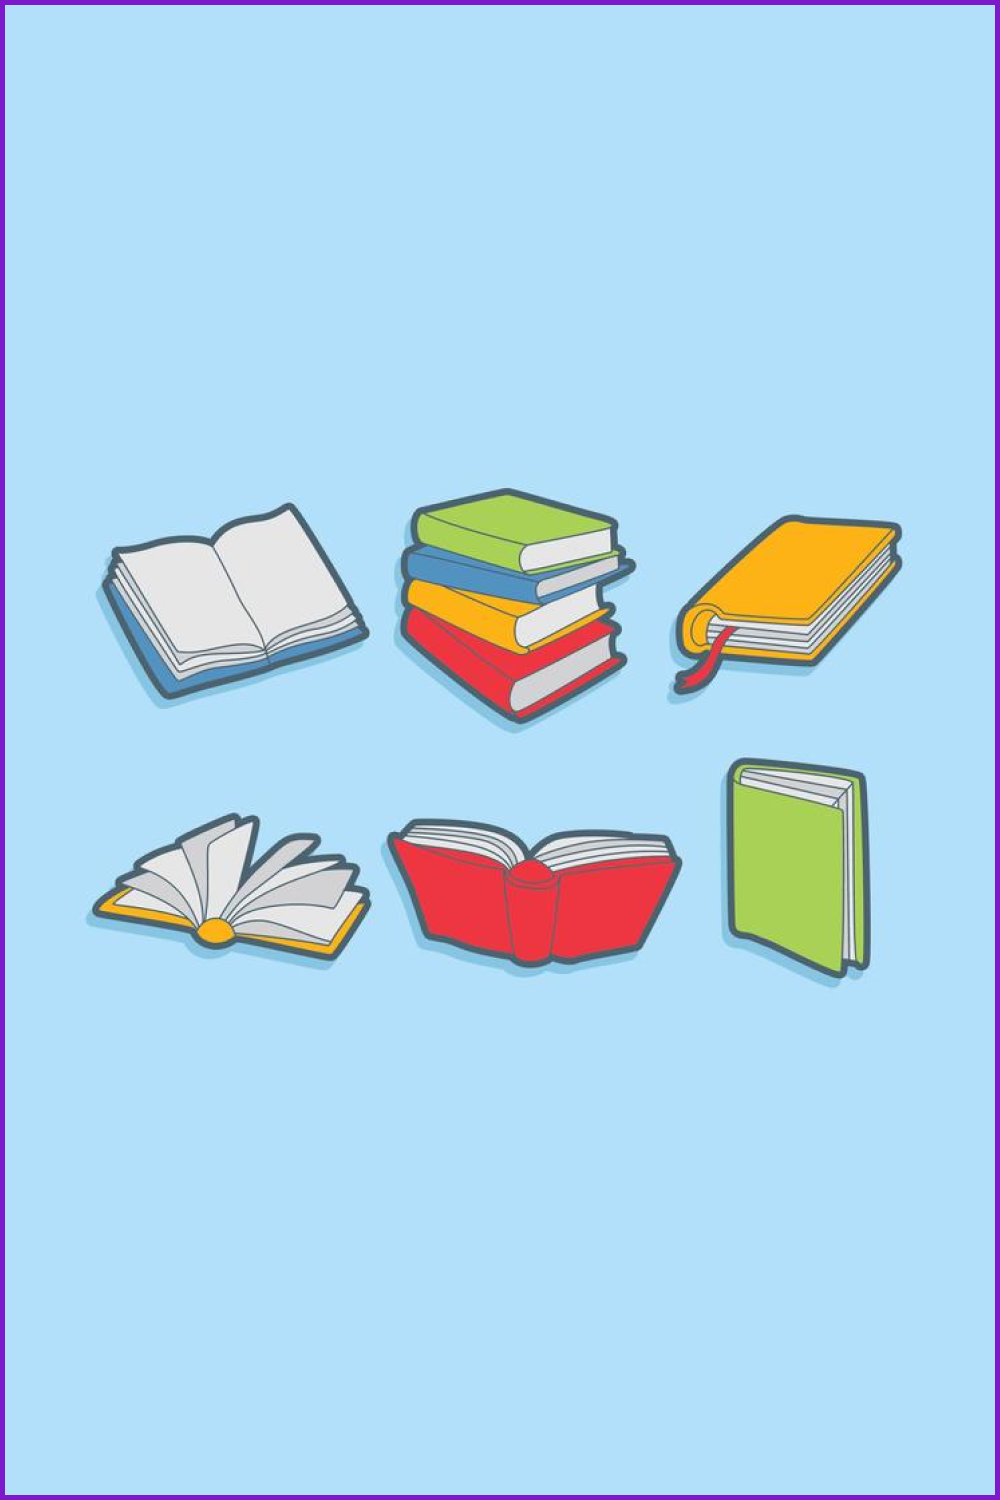 Drawn books open, with a bookmark, in a stack with colorful covers.